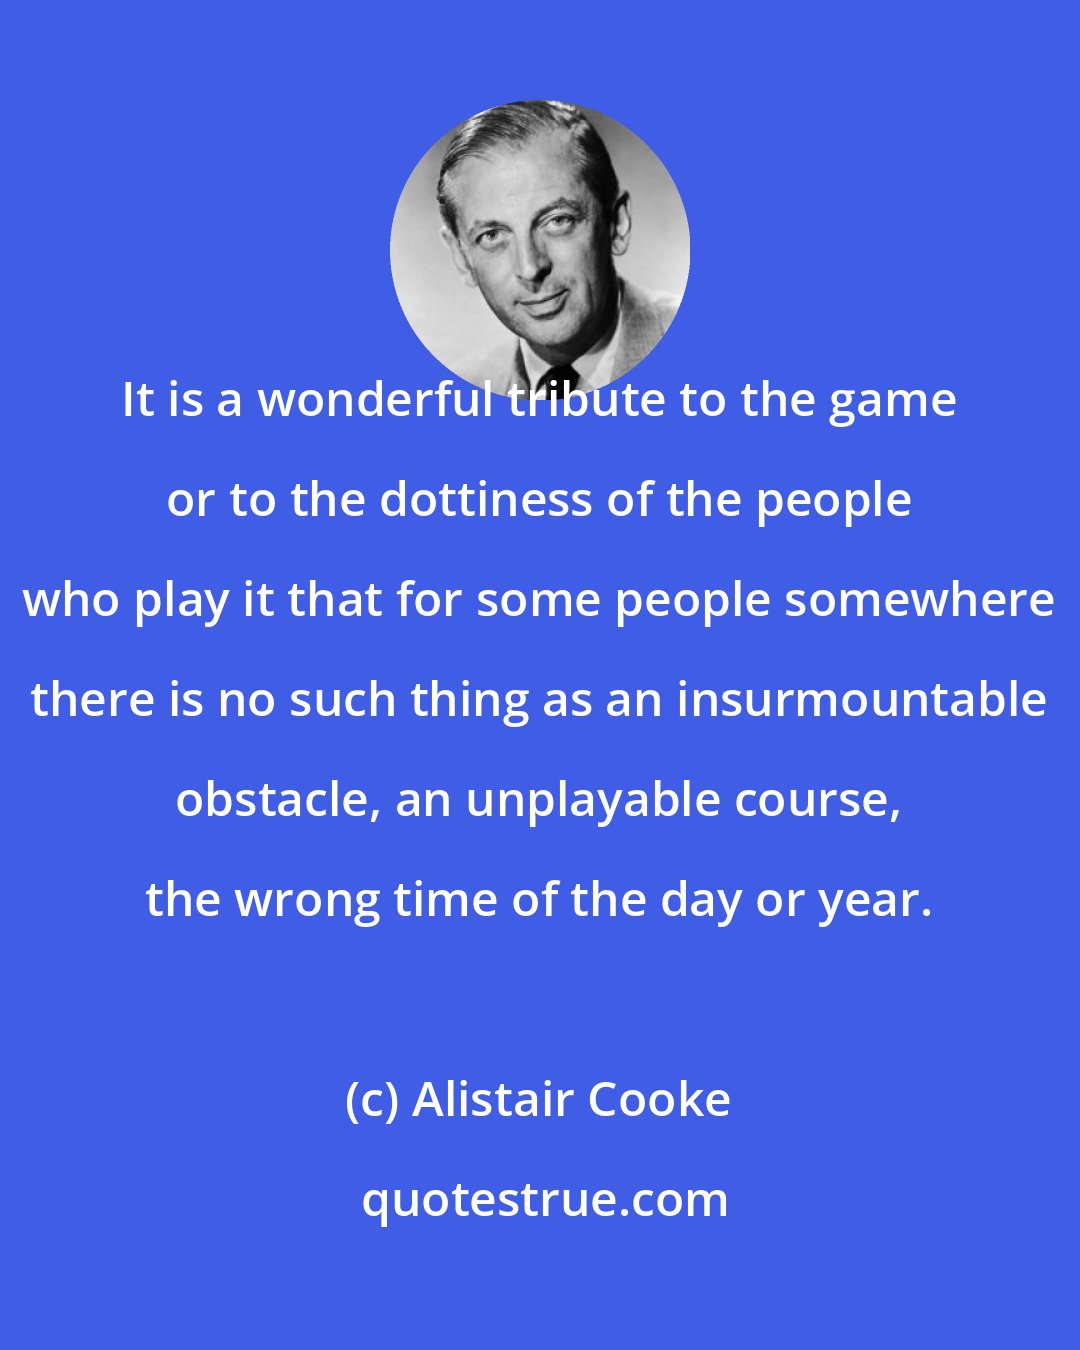 Alistair Cooke: It is a wonderful tribute to the game or to the dottiness of the people who play it that for some people somewhere there is no such thing as an insurmountable obstacle, an unplayable course, the wrong time of the day or year.